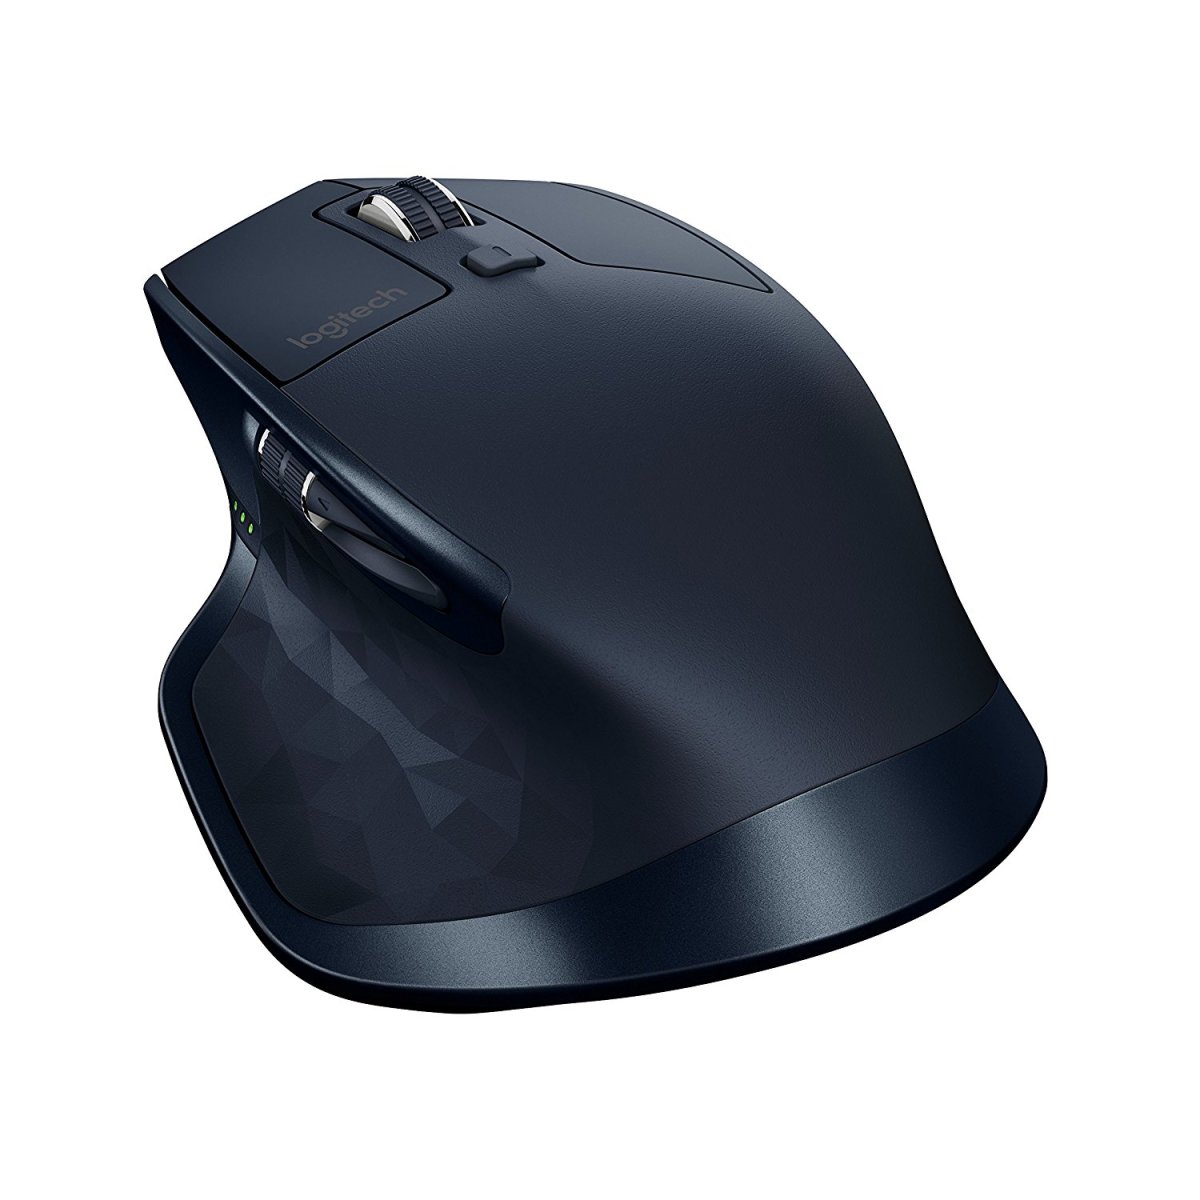 In my experience, the Logitech MX Master Wireless Mouse provides a comfortable user experience with plenty of useful features. It offers excellent value for money and even outperforms the Apple Magic Mouse in my opinion.